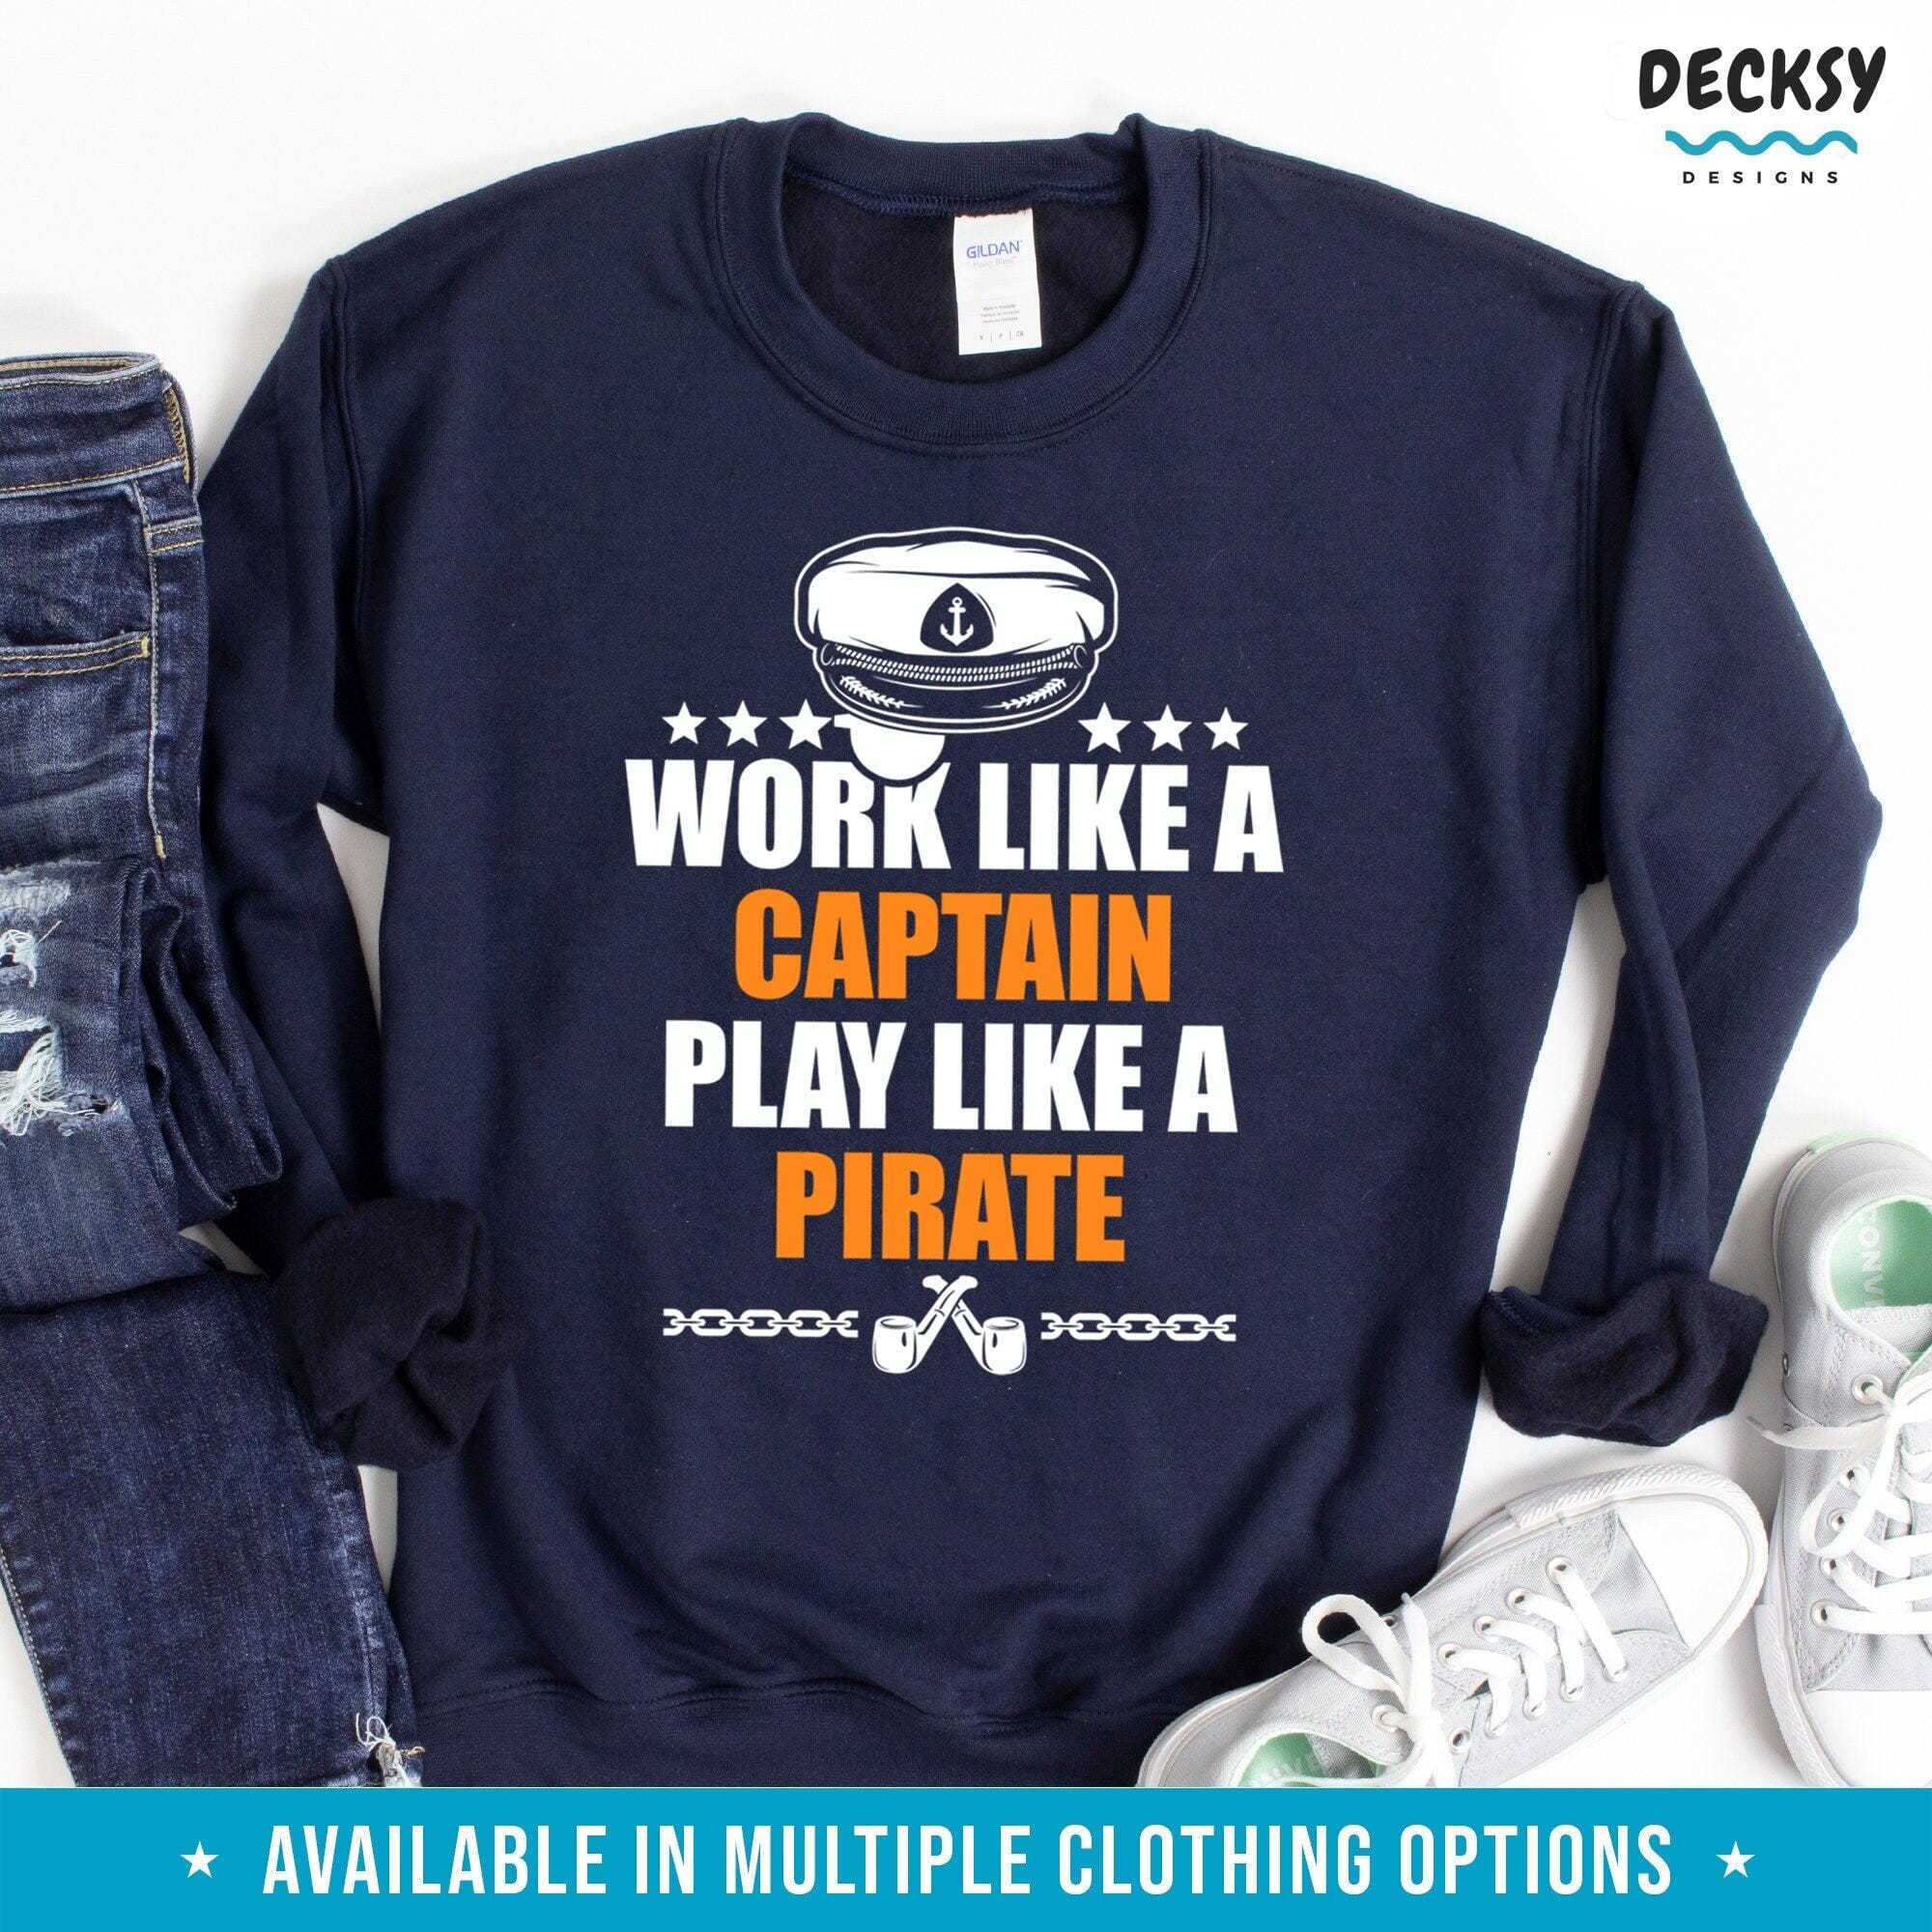 Sailing Tshirt, Boat Owner Gift-Clothing:Gender-Neutral Adult Clothing:Tops & Tees:T-shirts:Graphic Tees-DecksyDesigns